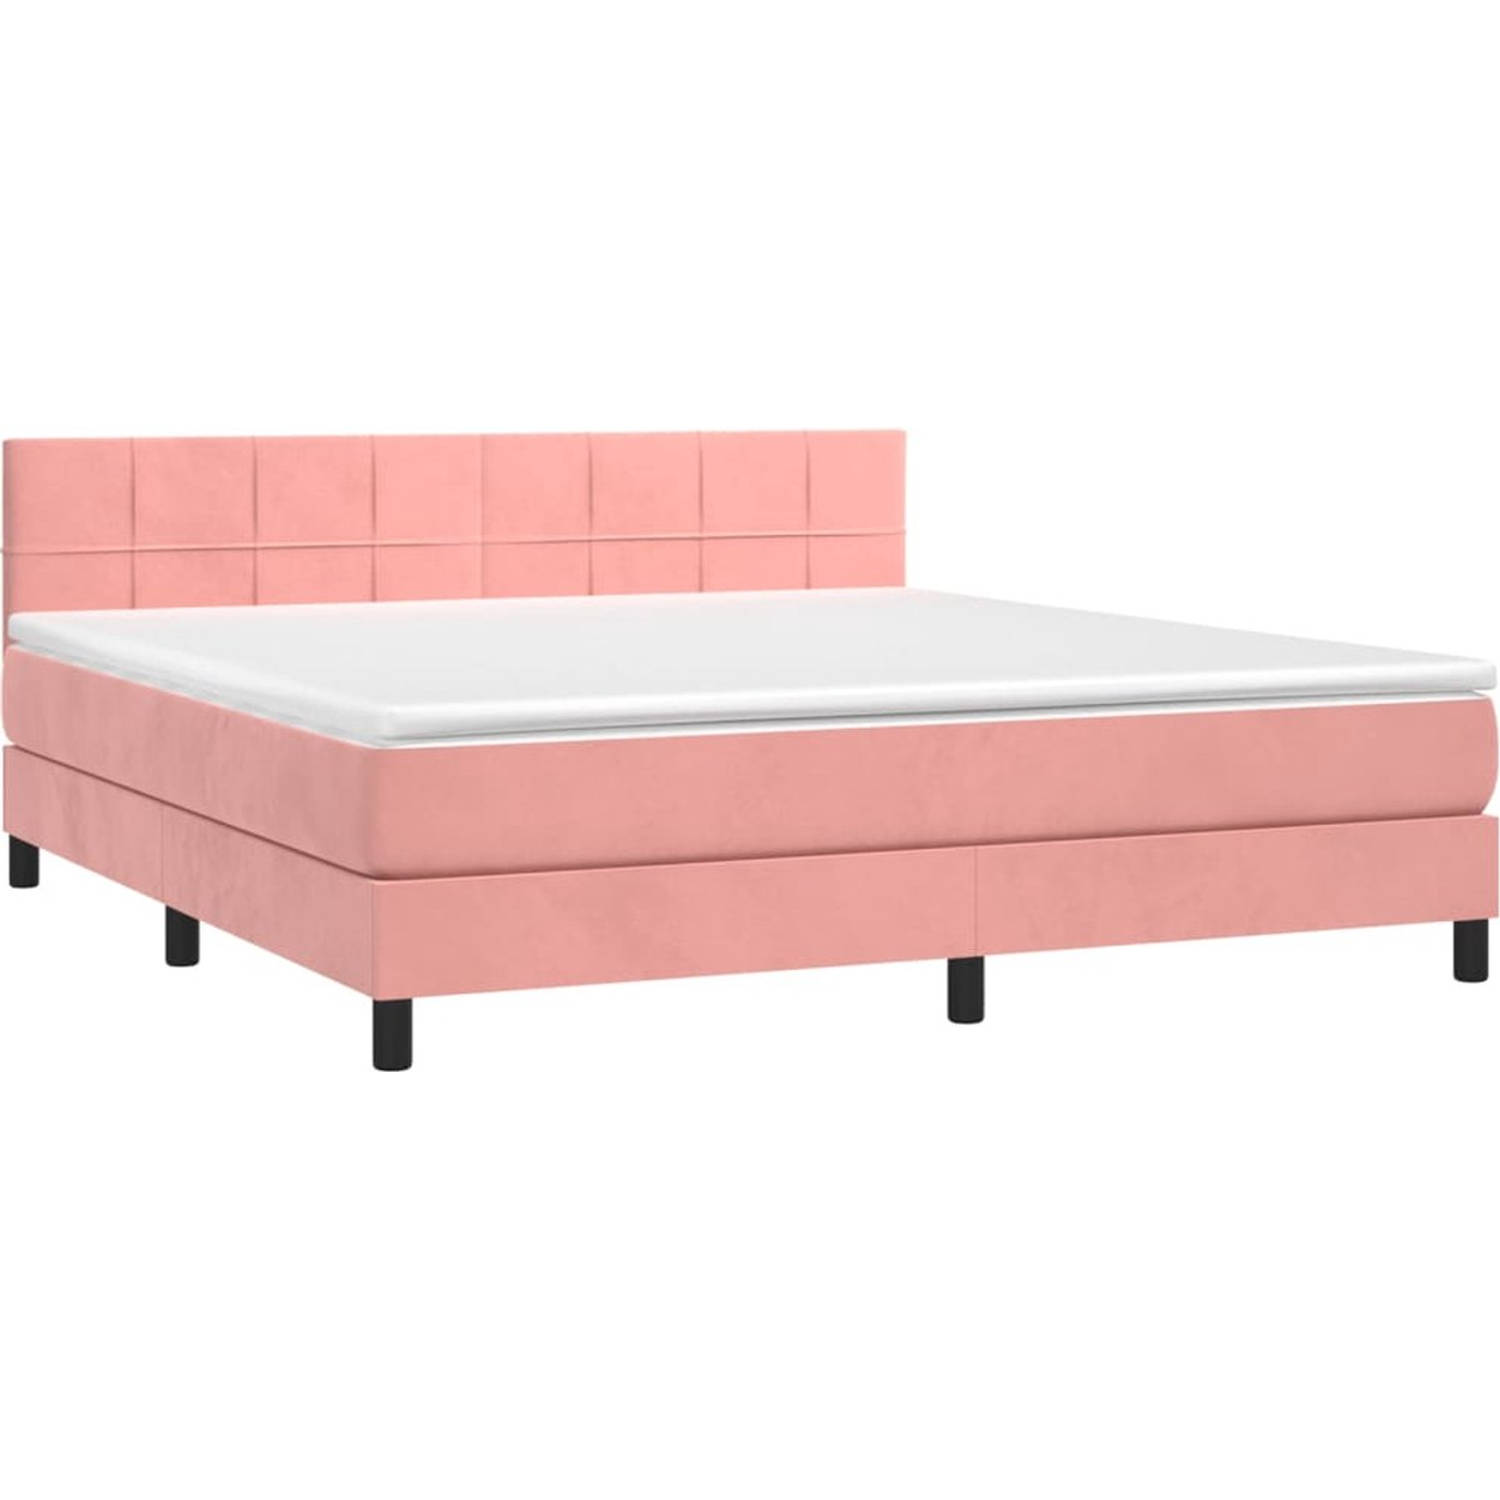 The Living Store Boxspring - LED - Bed - 160 x 200 cm - Roze fluweel